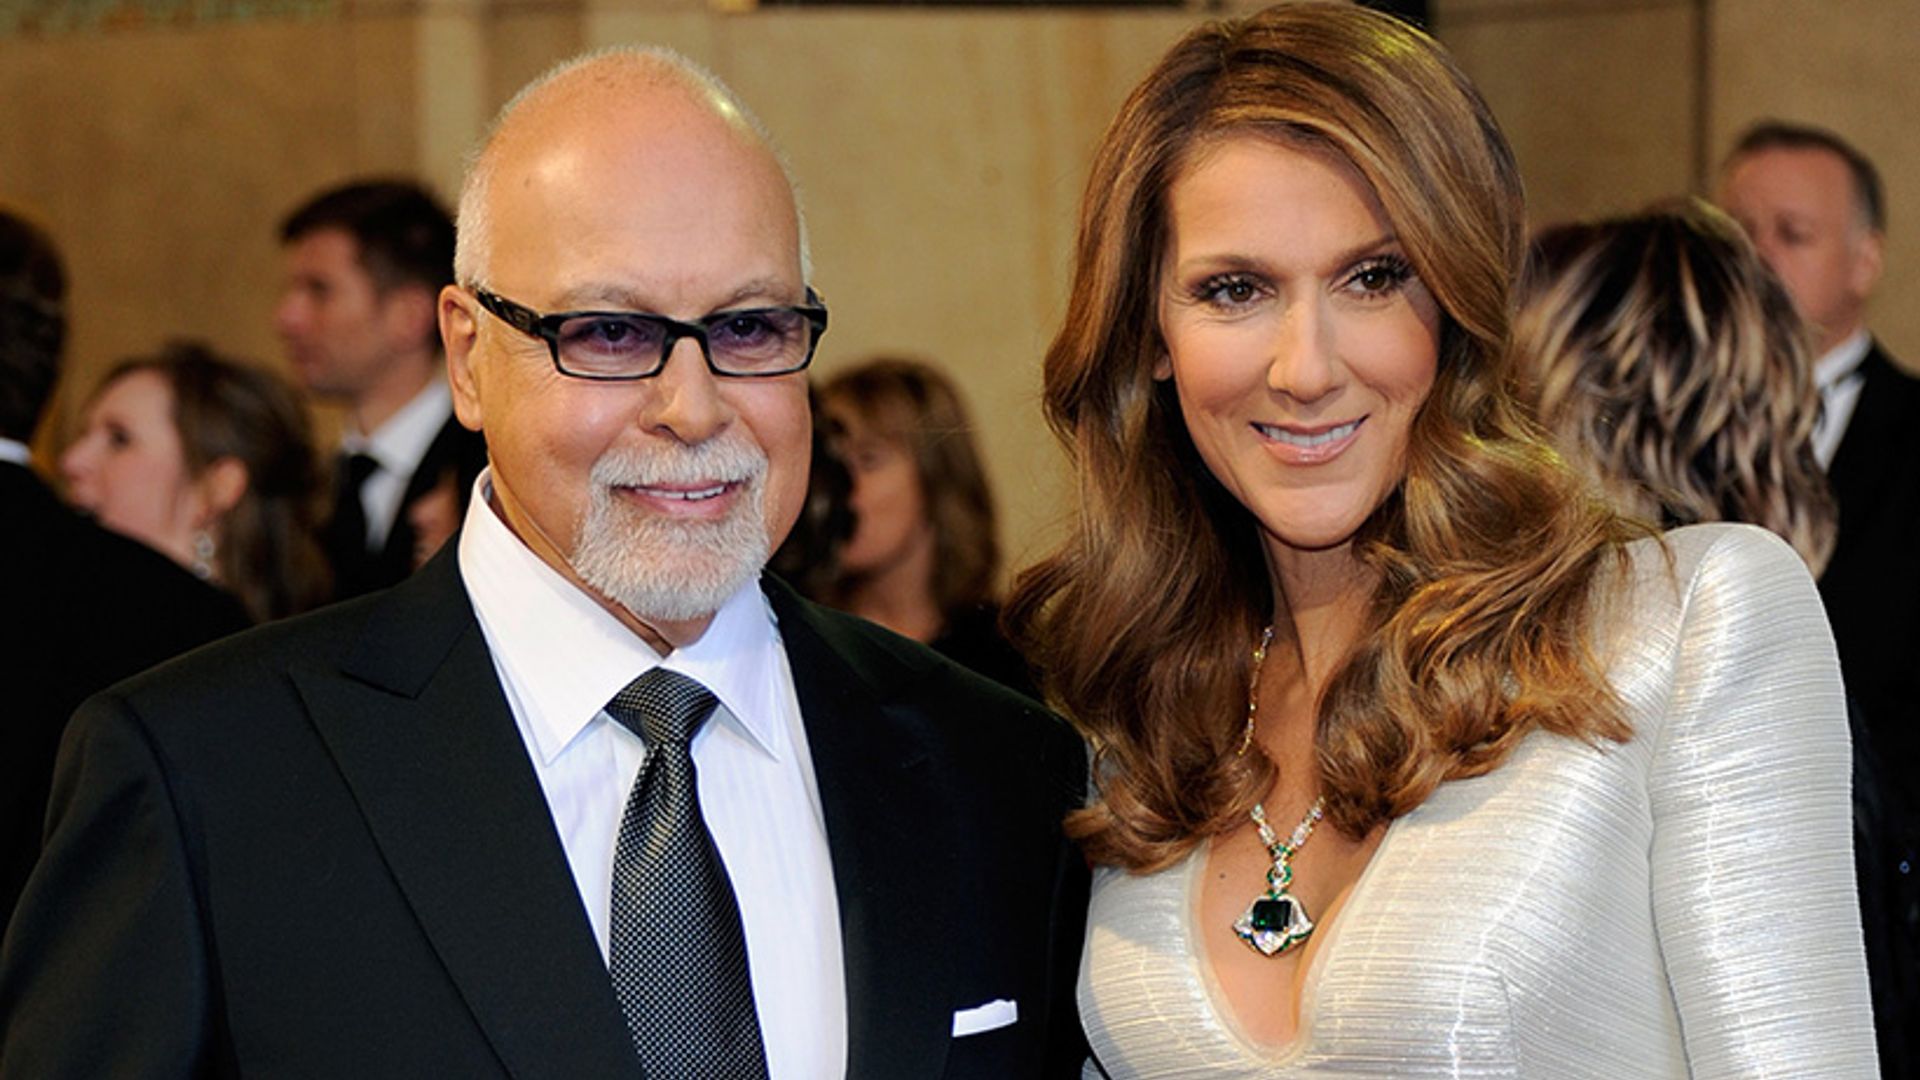 Celine Dion prepares for her first Christmas without beloved husband René